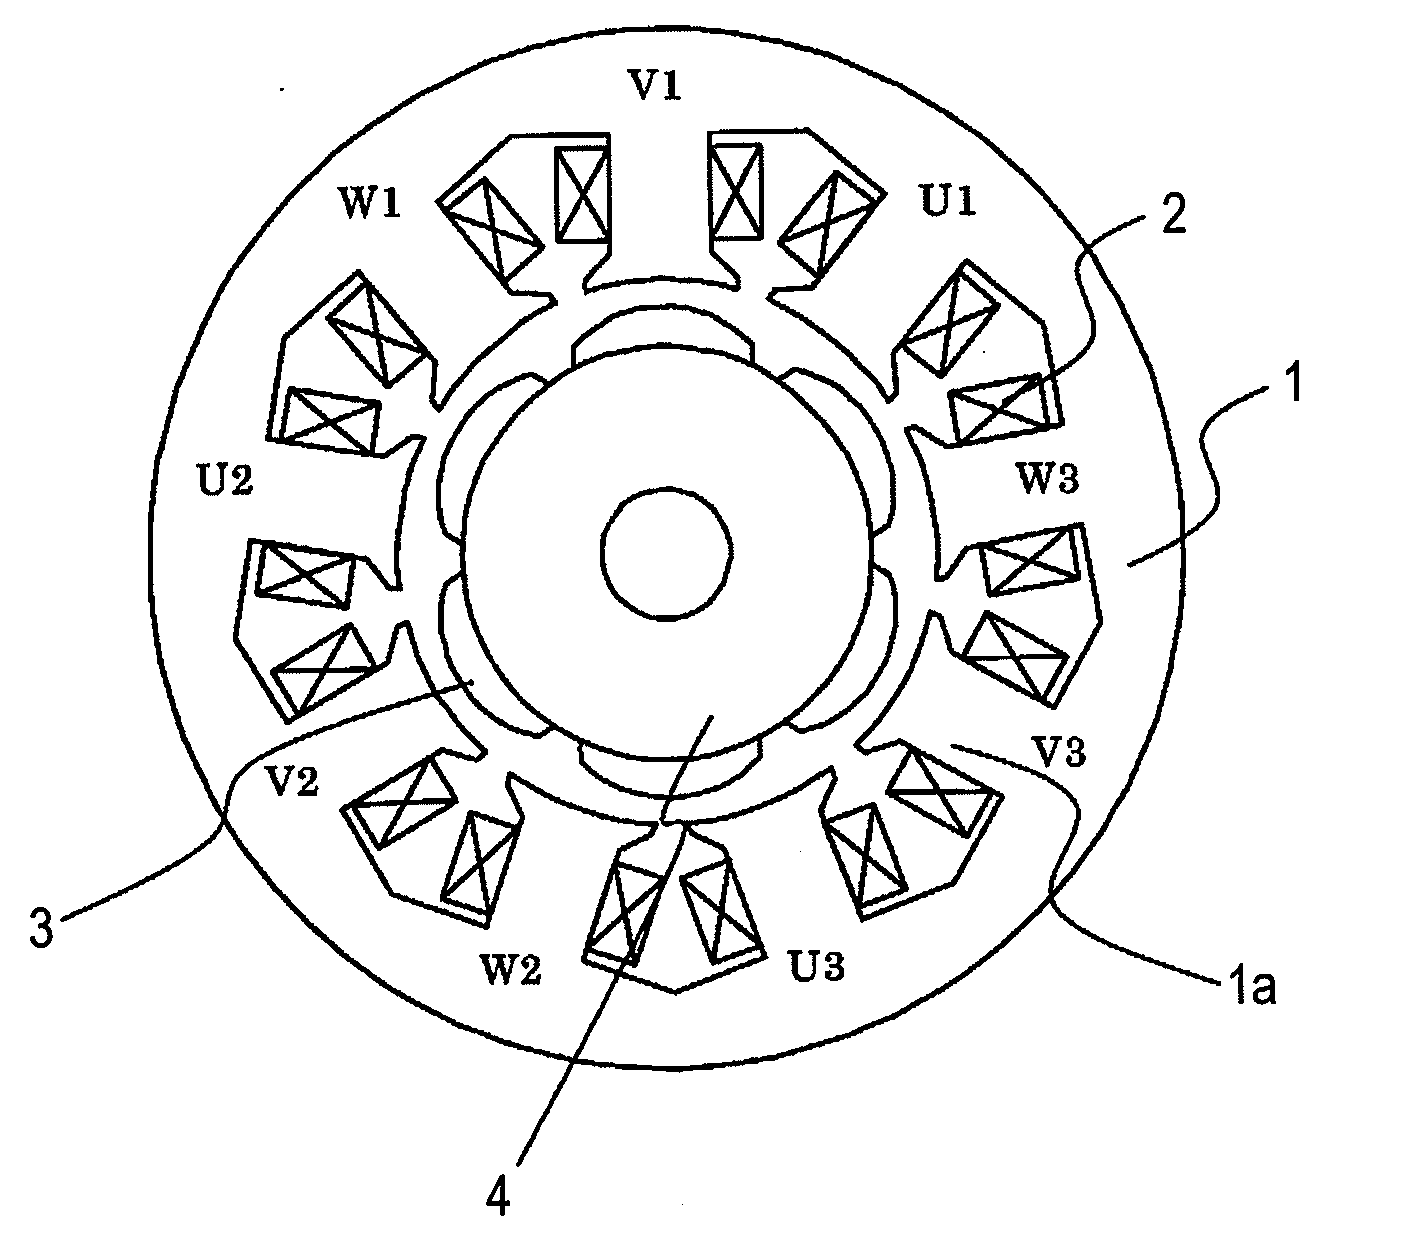 Permanent-magnetic type rotary electric machine